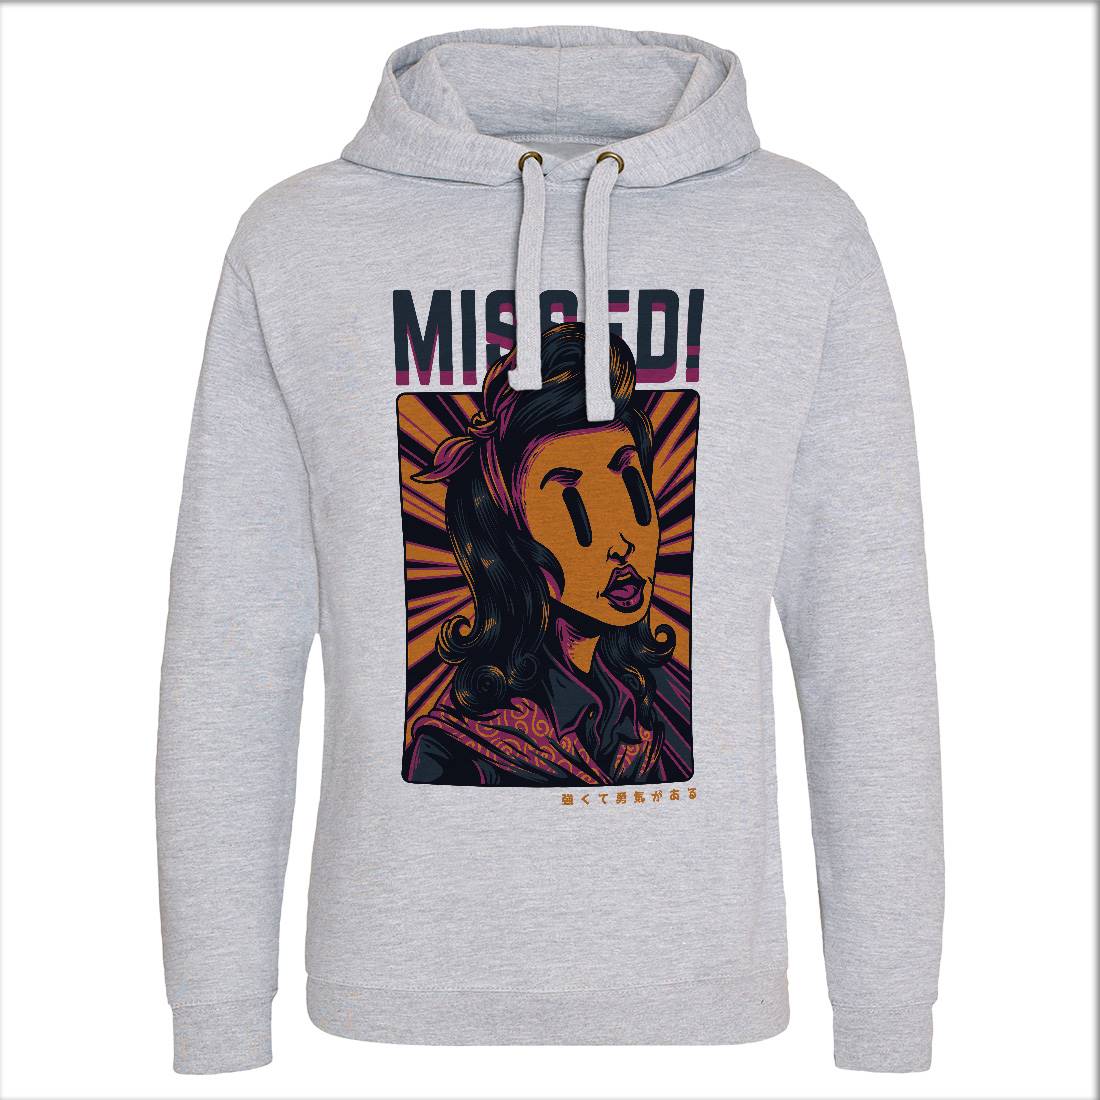 Missed Girl Mens Hoodie Without Pocket Retro D654